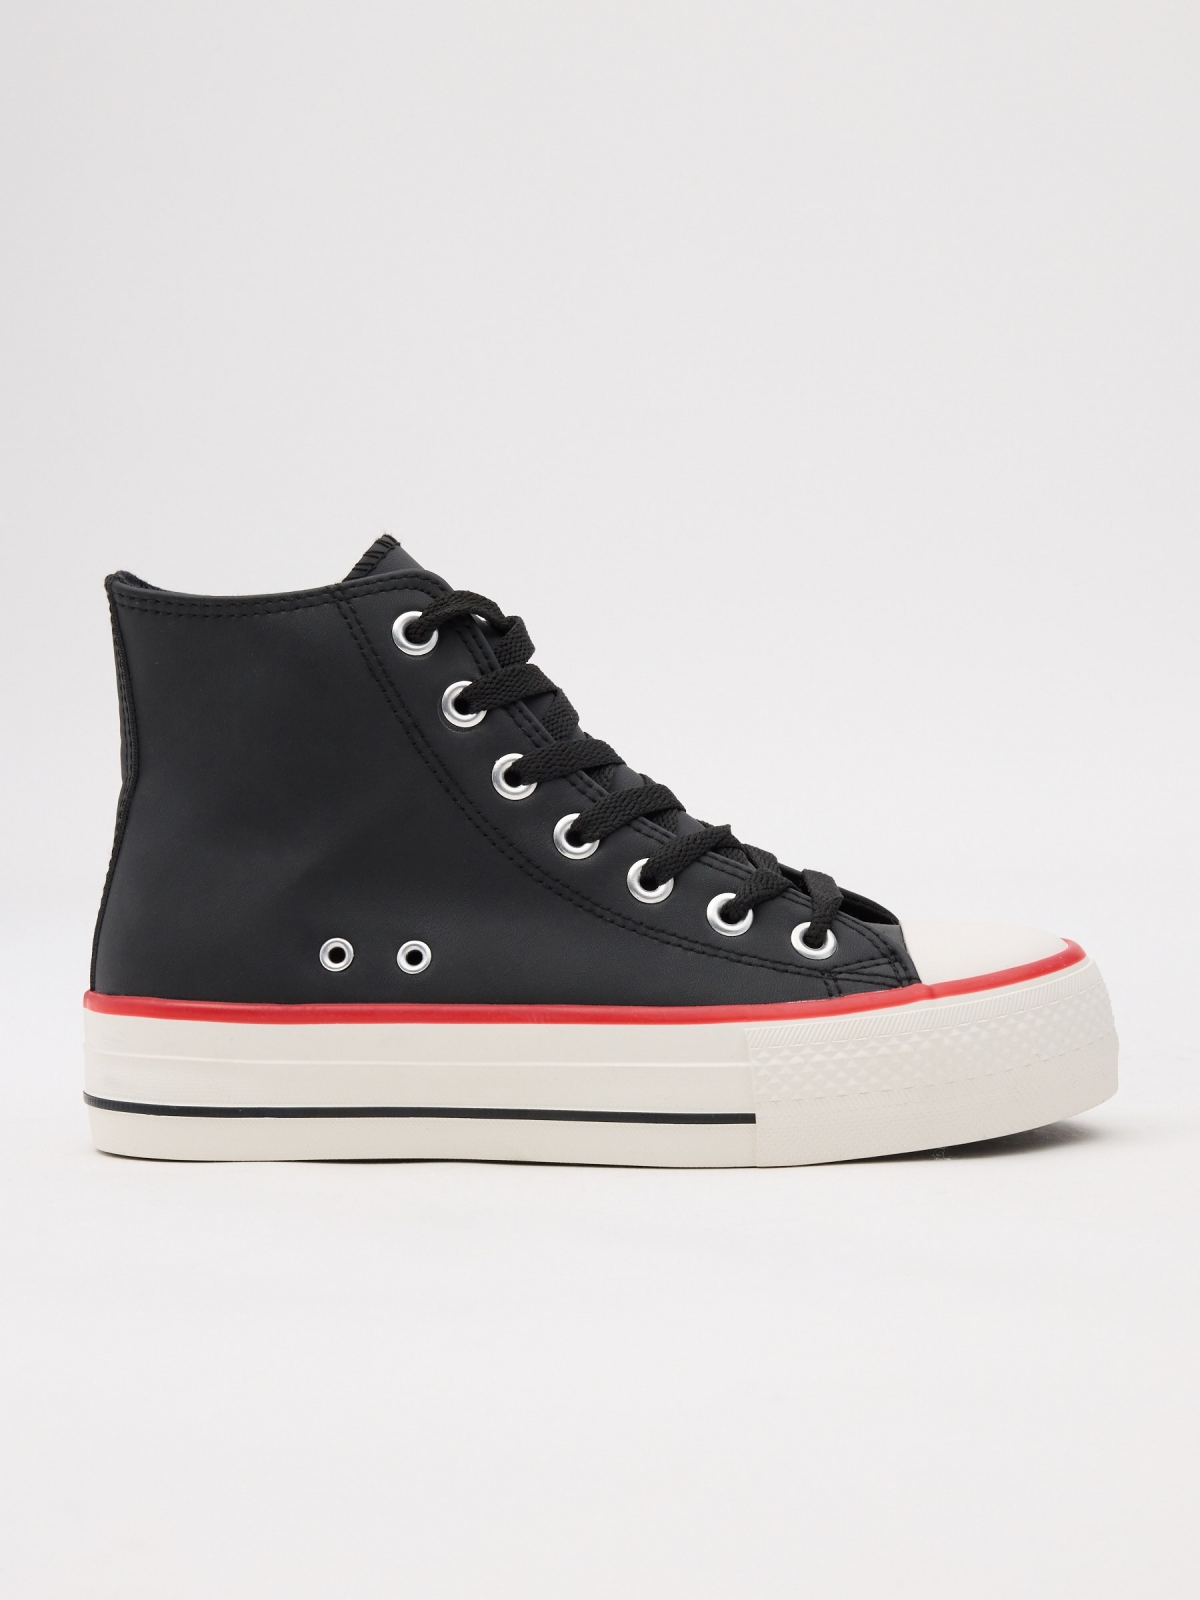 Patent leather boot sneakers black